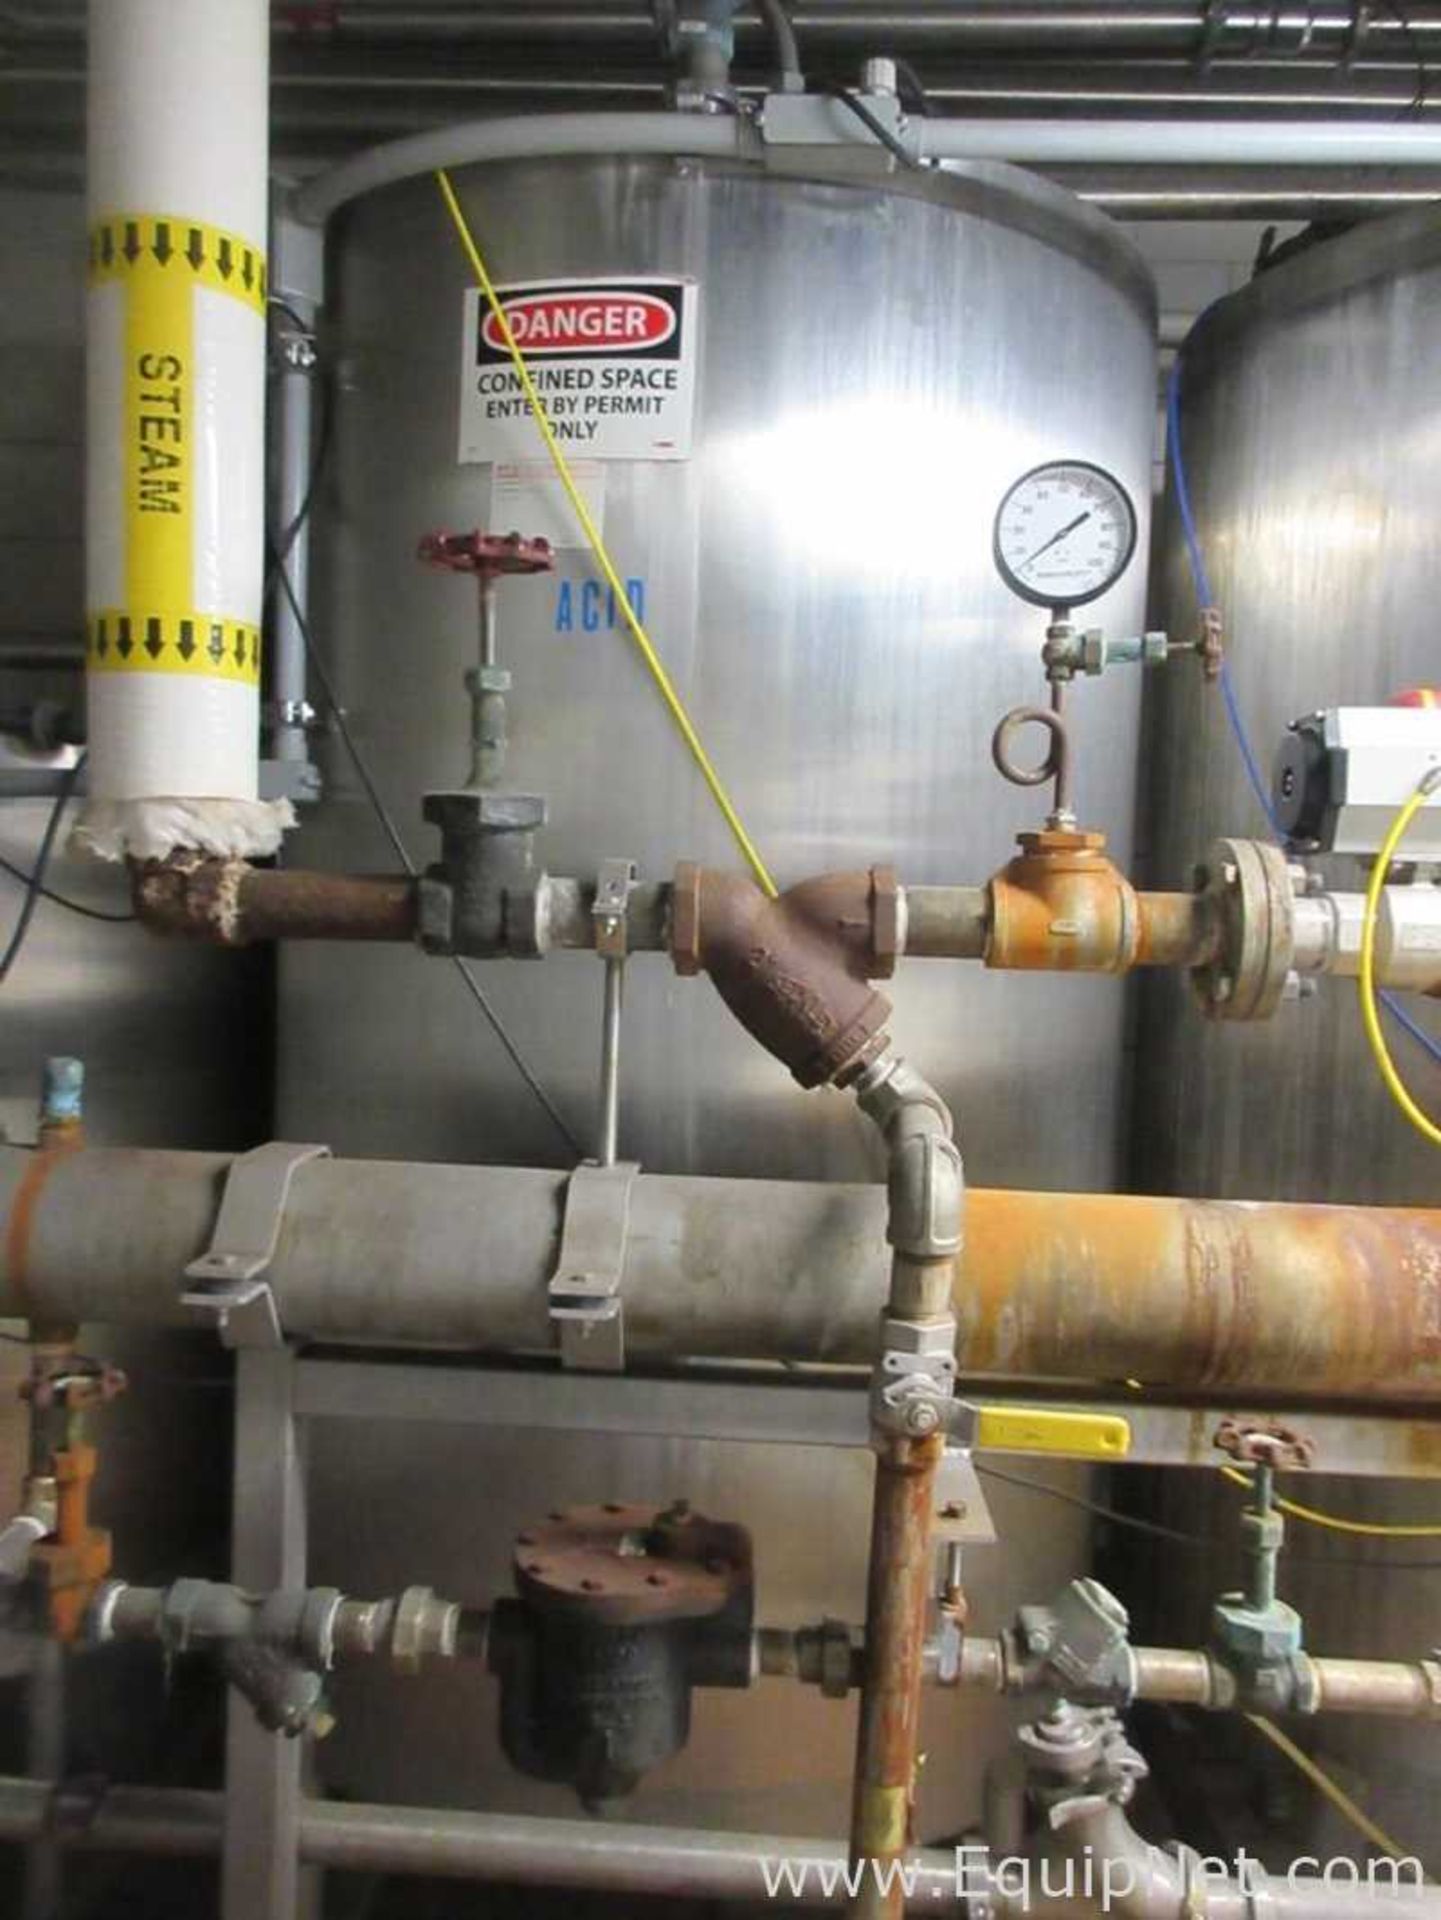 EQUIPNET LISTING #775980; REMOVAL COST: $15,754.00; DESCRIPTION: CIP System With Three Tanks, - Image 4 of 17